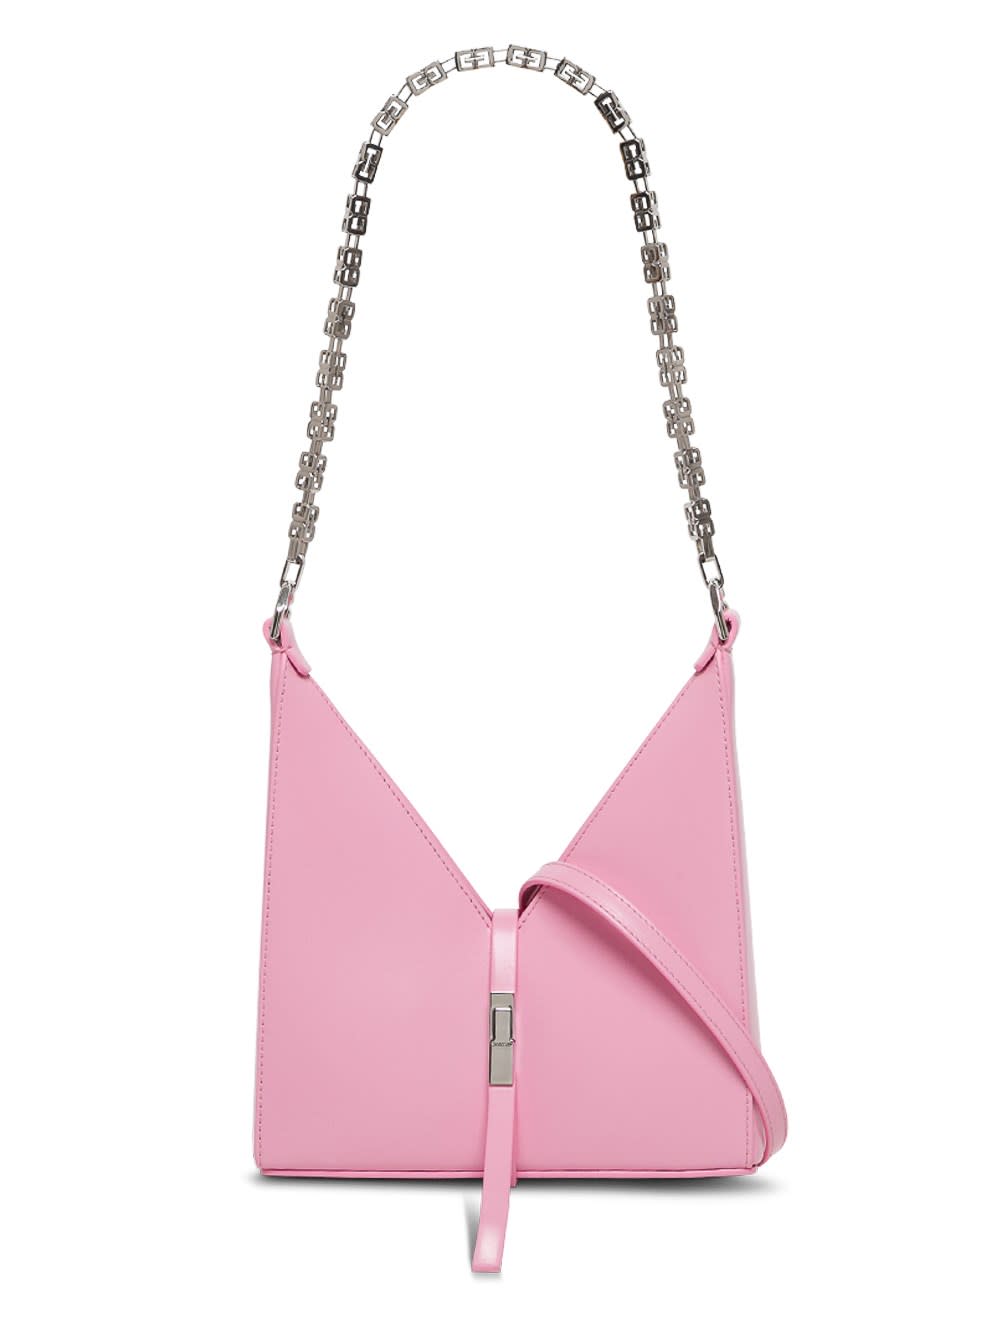 Givenchy Cut Out Crossbody Bag In Pink Leather